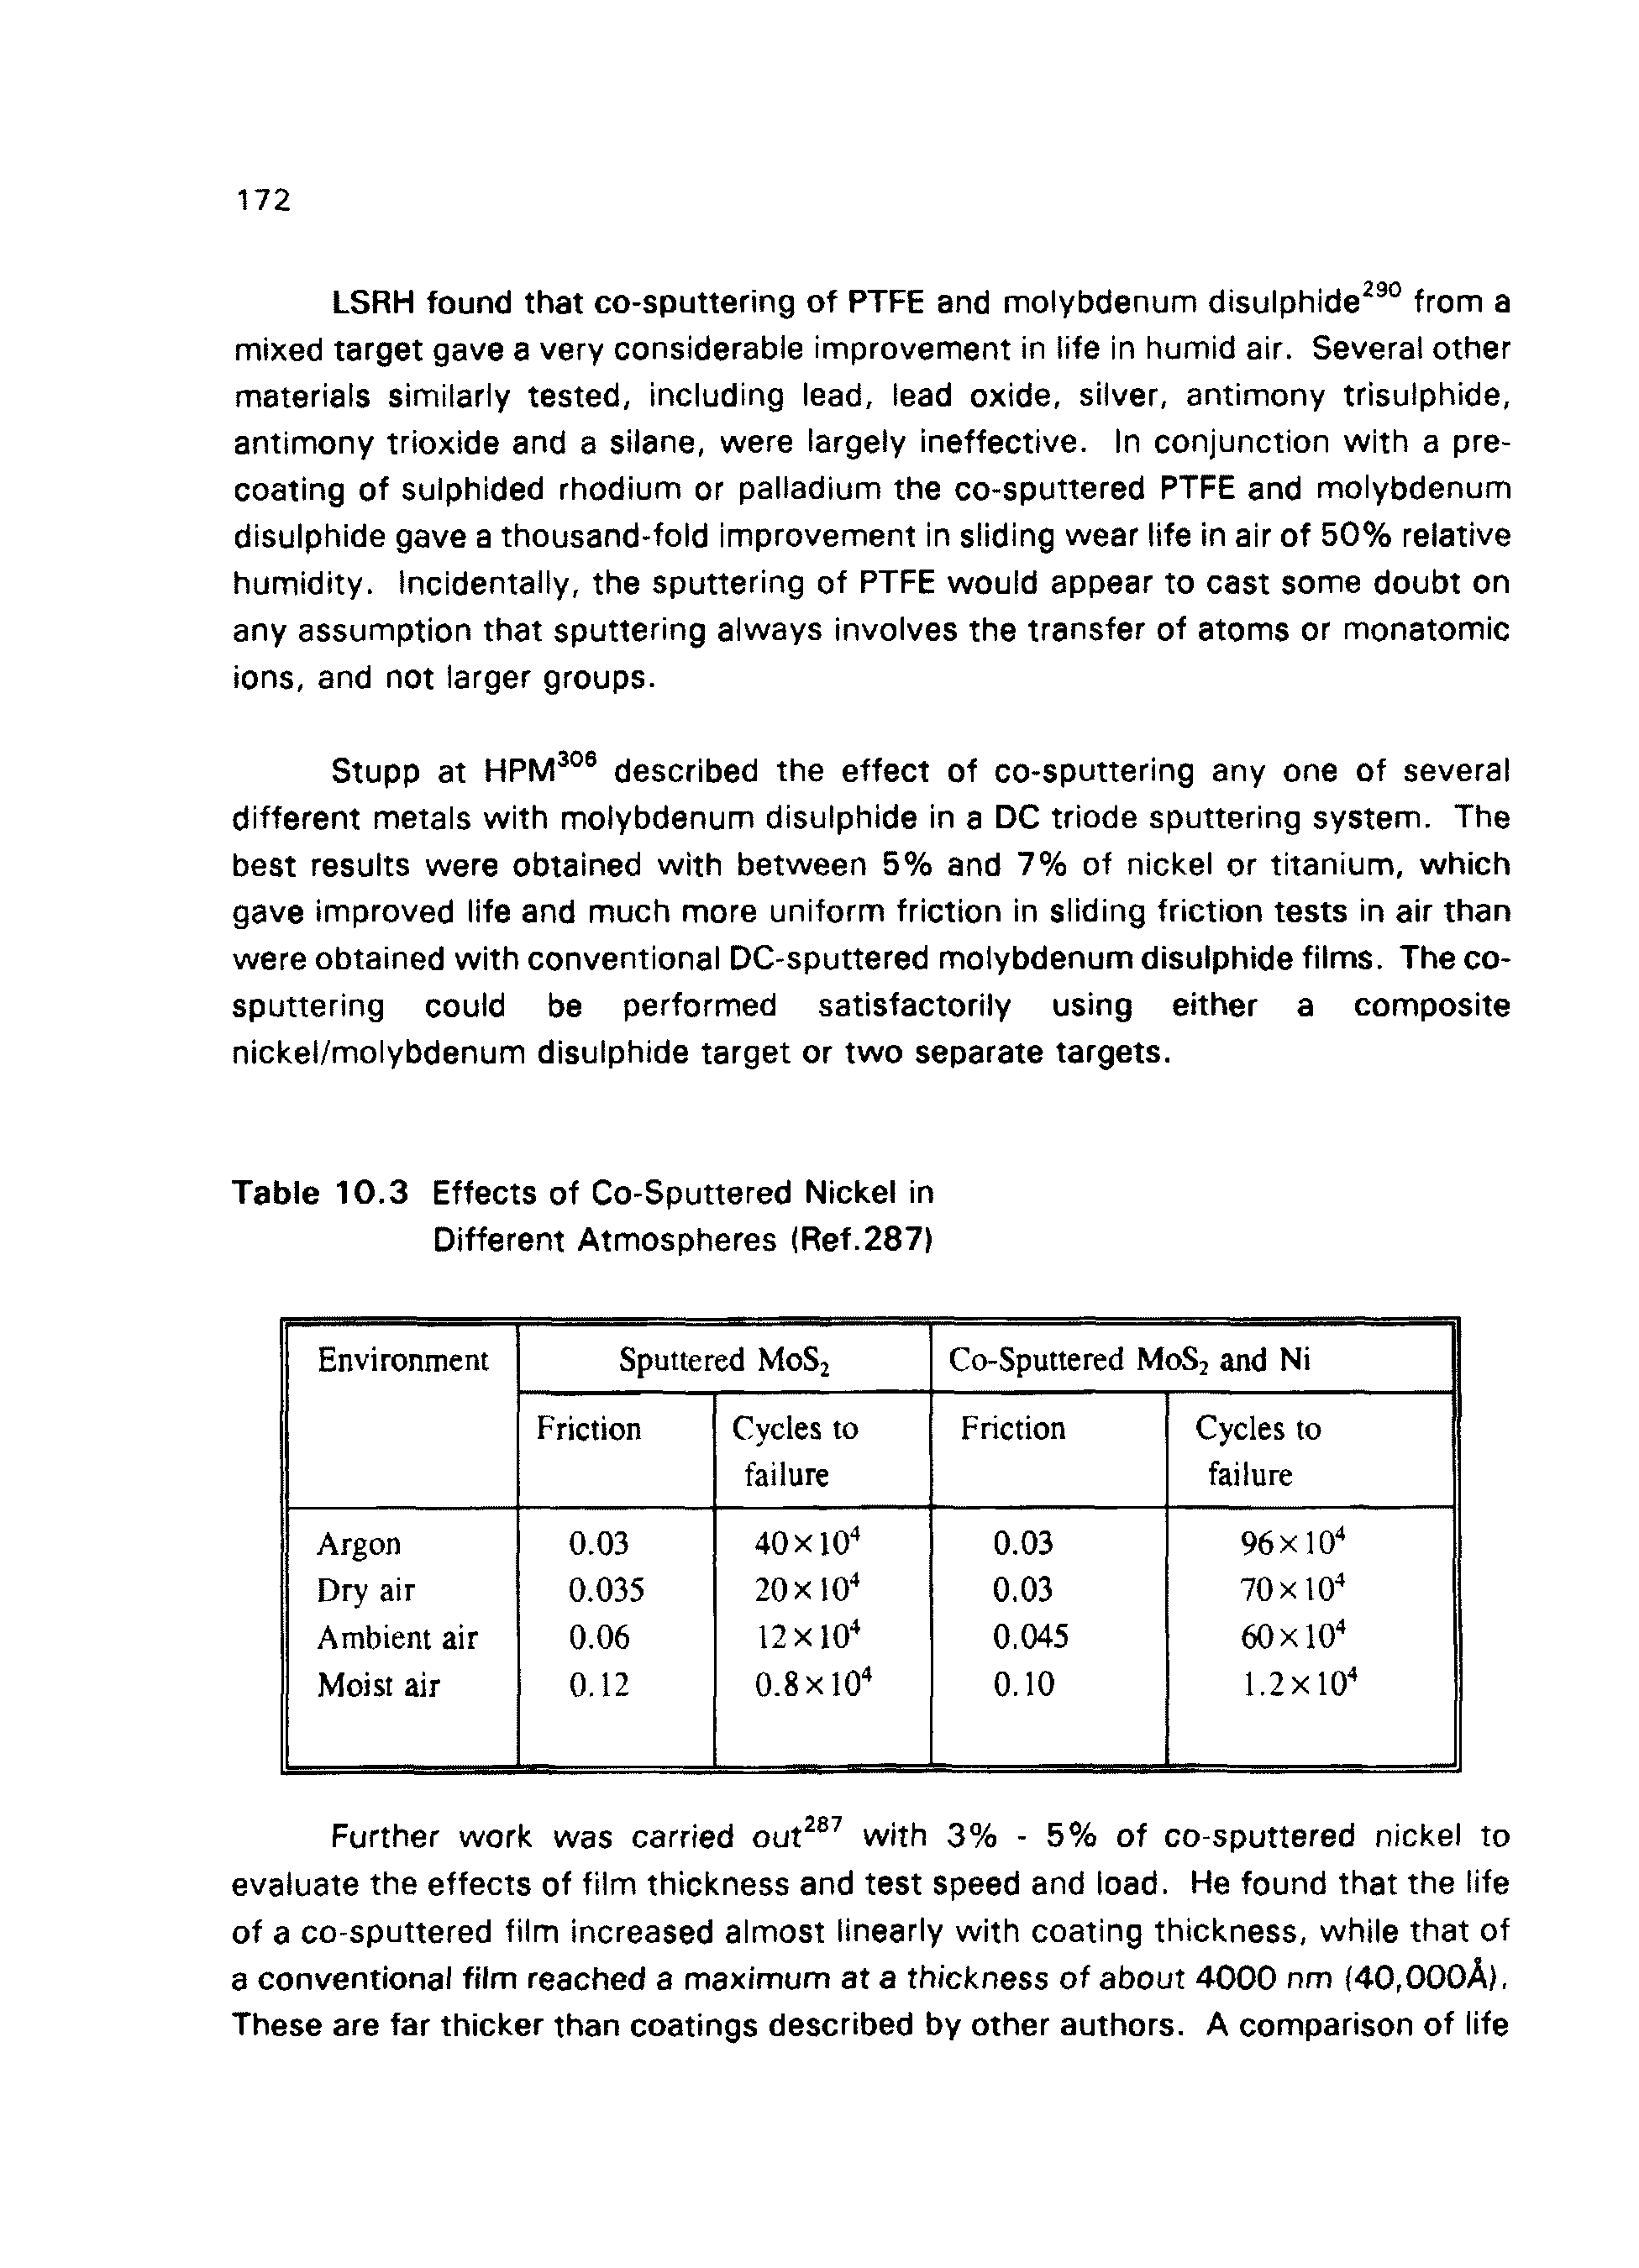 Table 10.3 Effects of Co-Sputtered Nickel in Different Atmospheres (Ref.287)...